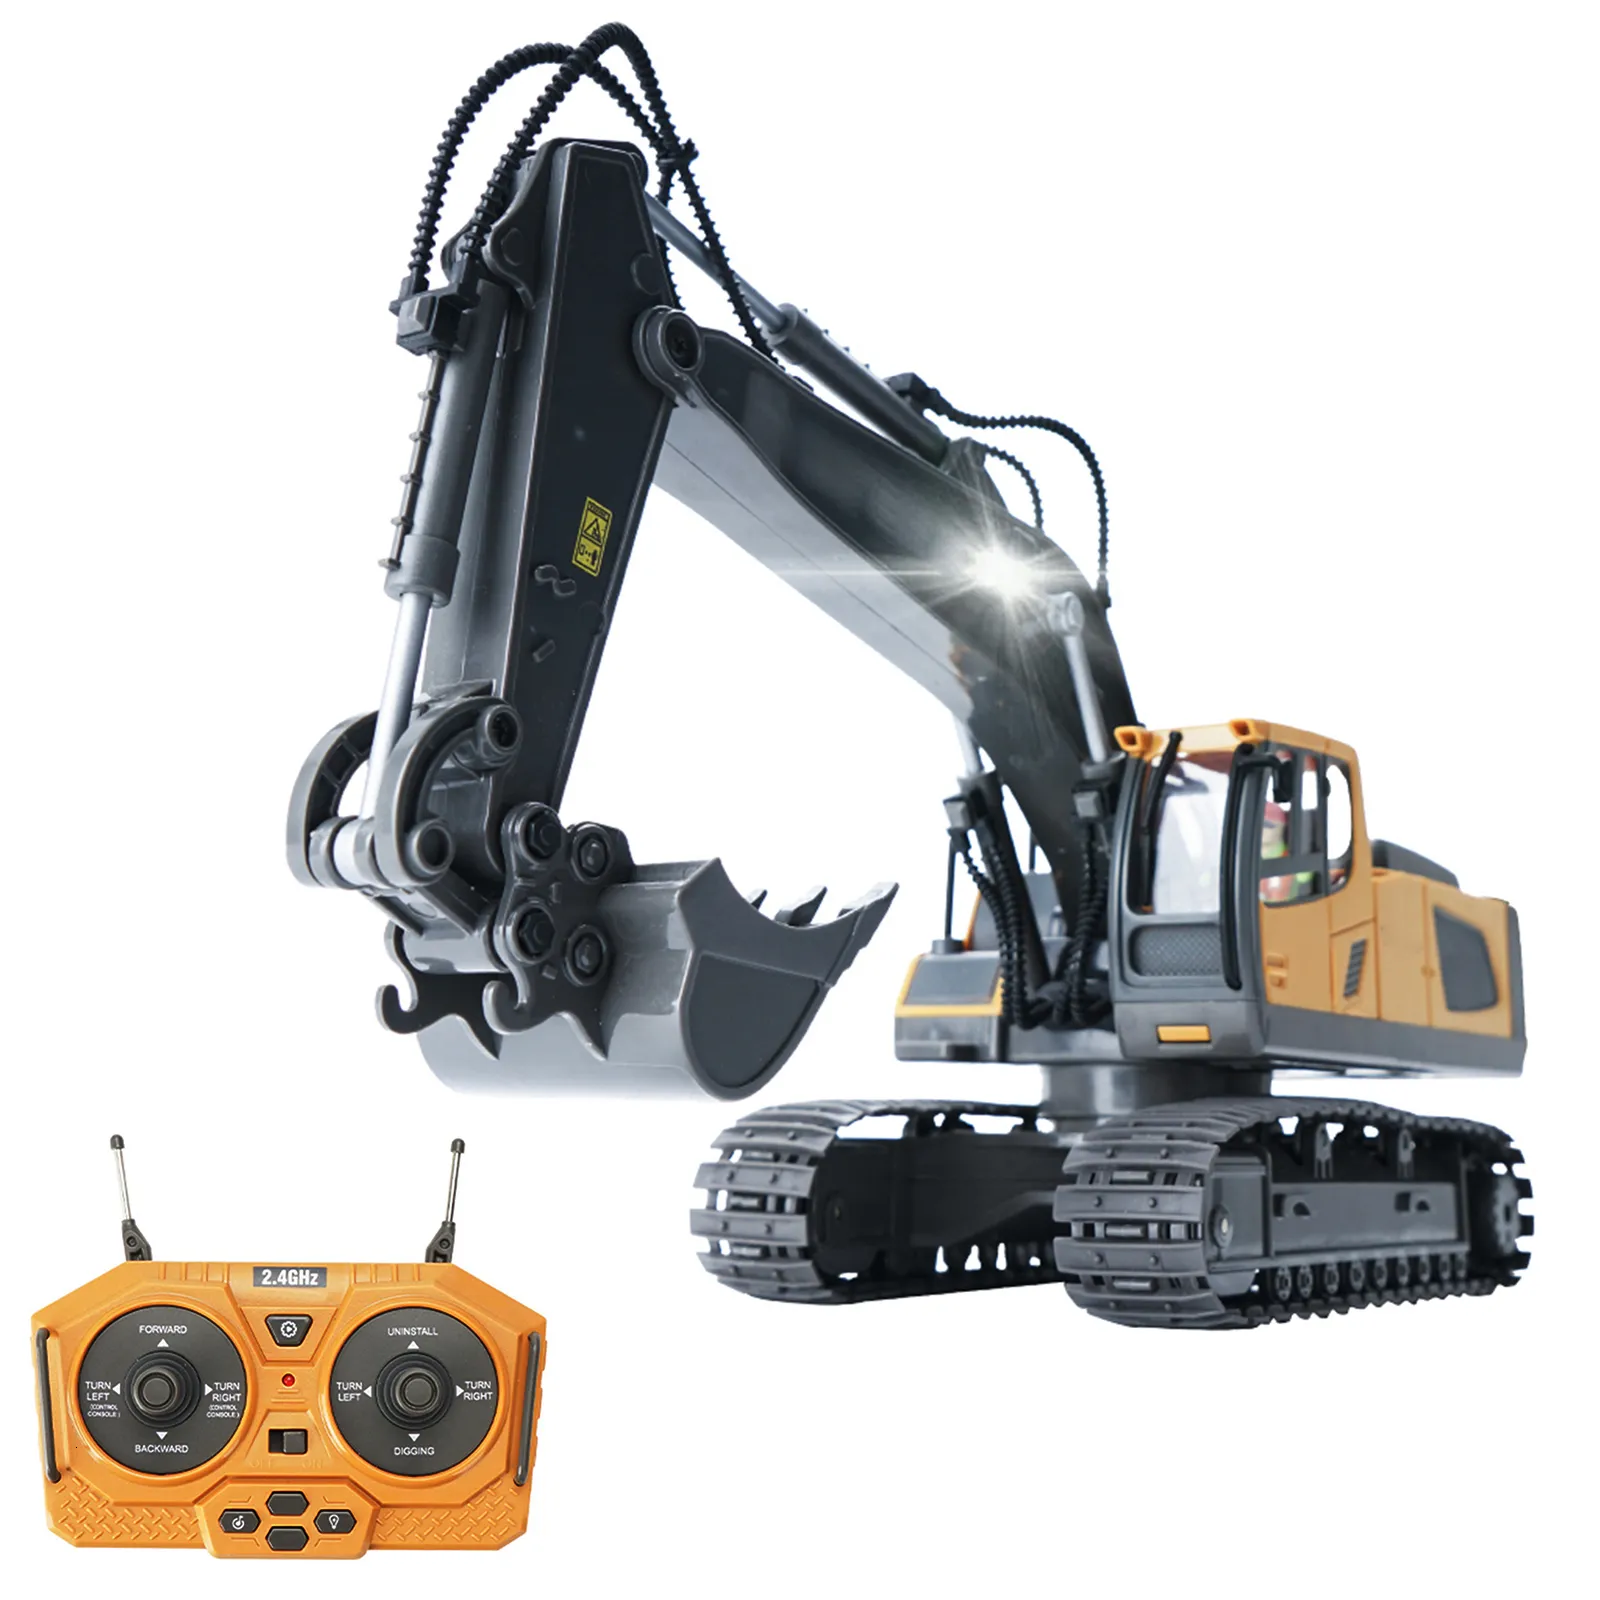 ElectricRC Car RC ExcavatorBulldozer 120 24GHz 11CH Construction Truck Engineering Vehicles Educational Toys for Kids with Light Music 230630